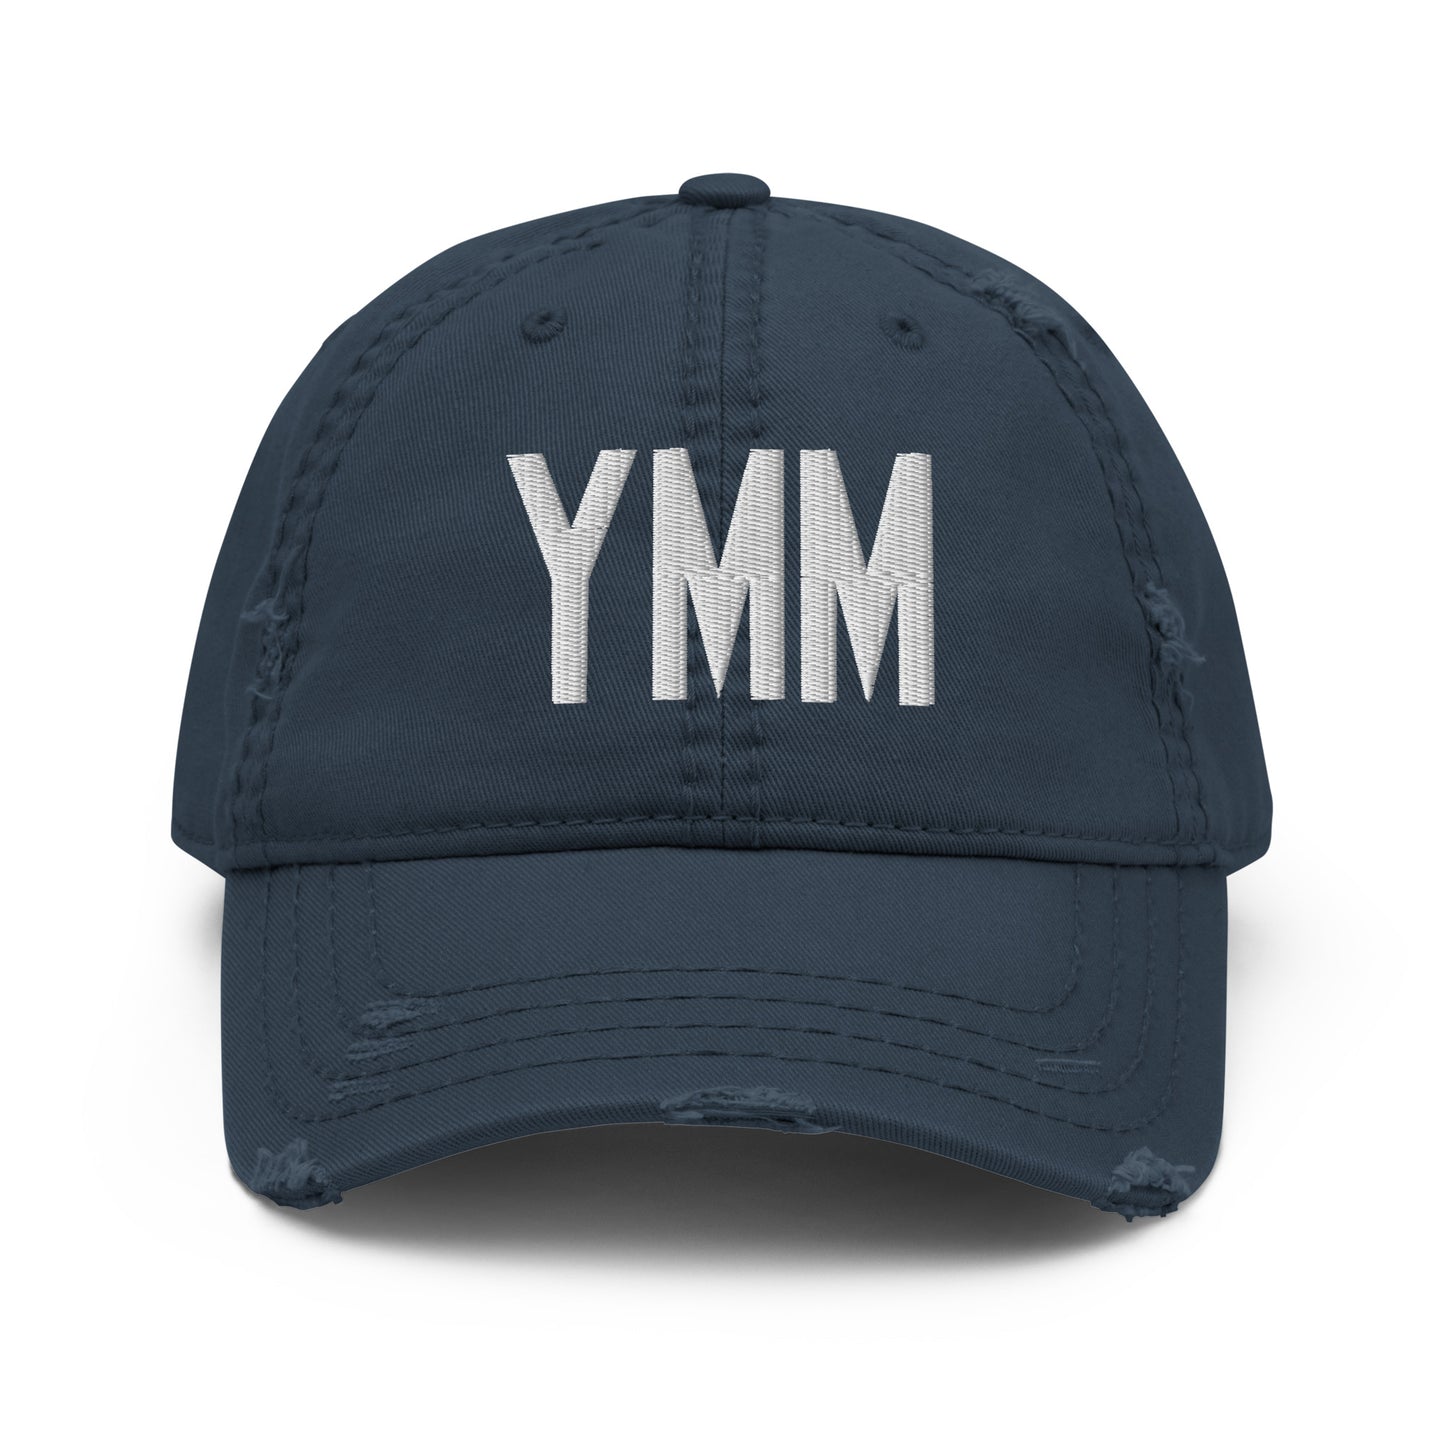 Airport Code Distressed Hat - White • YMM Fort McMurray • YHM Designs - Image 13